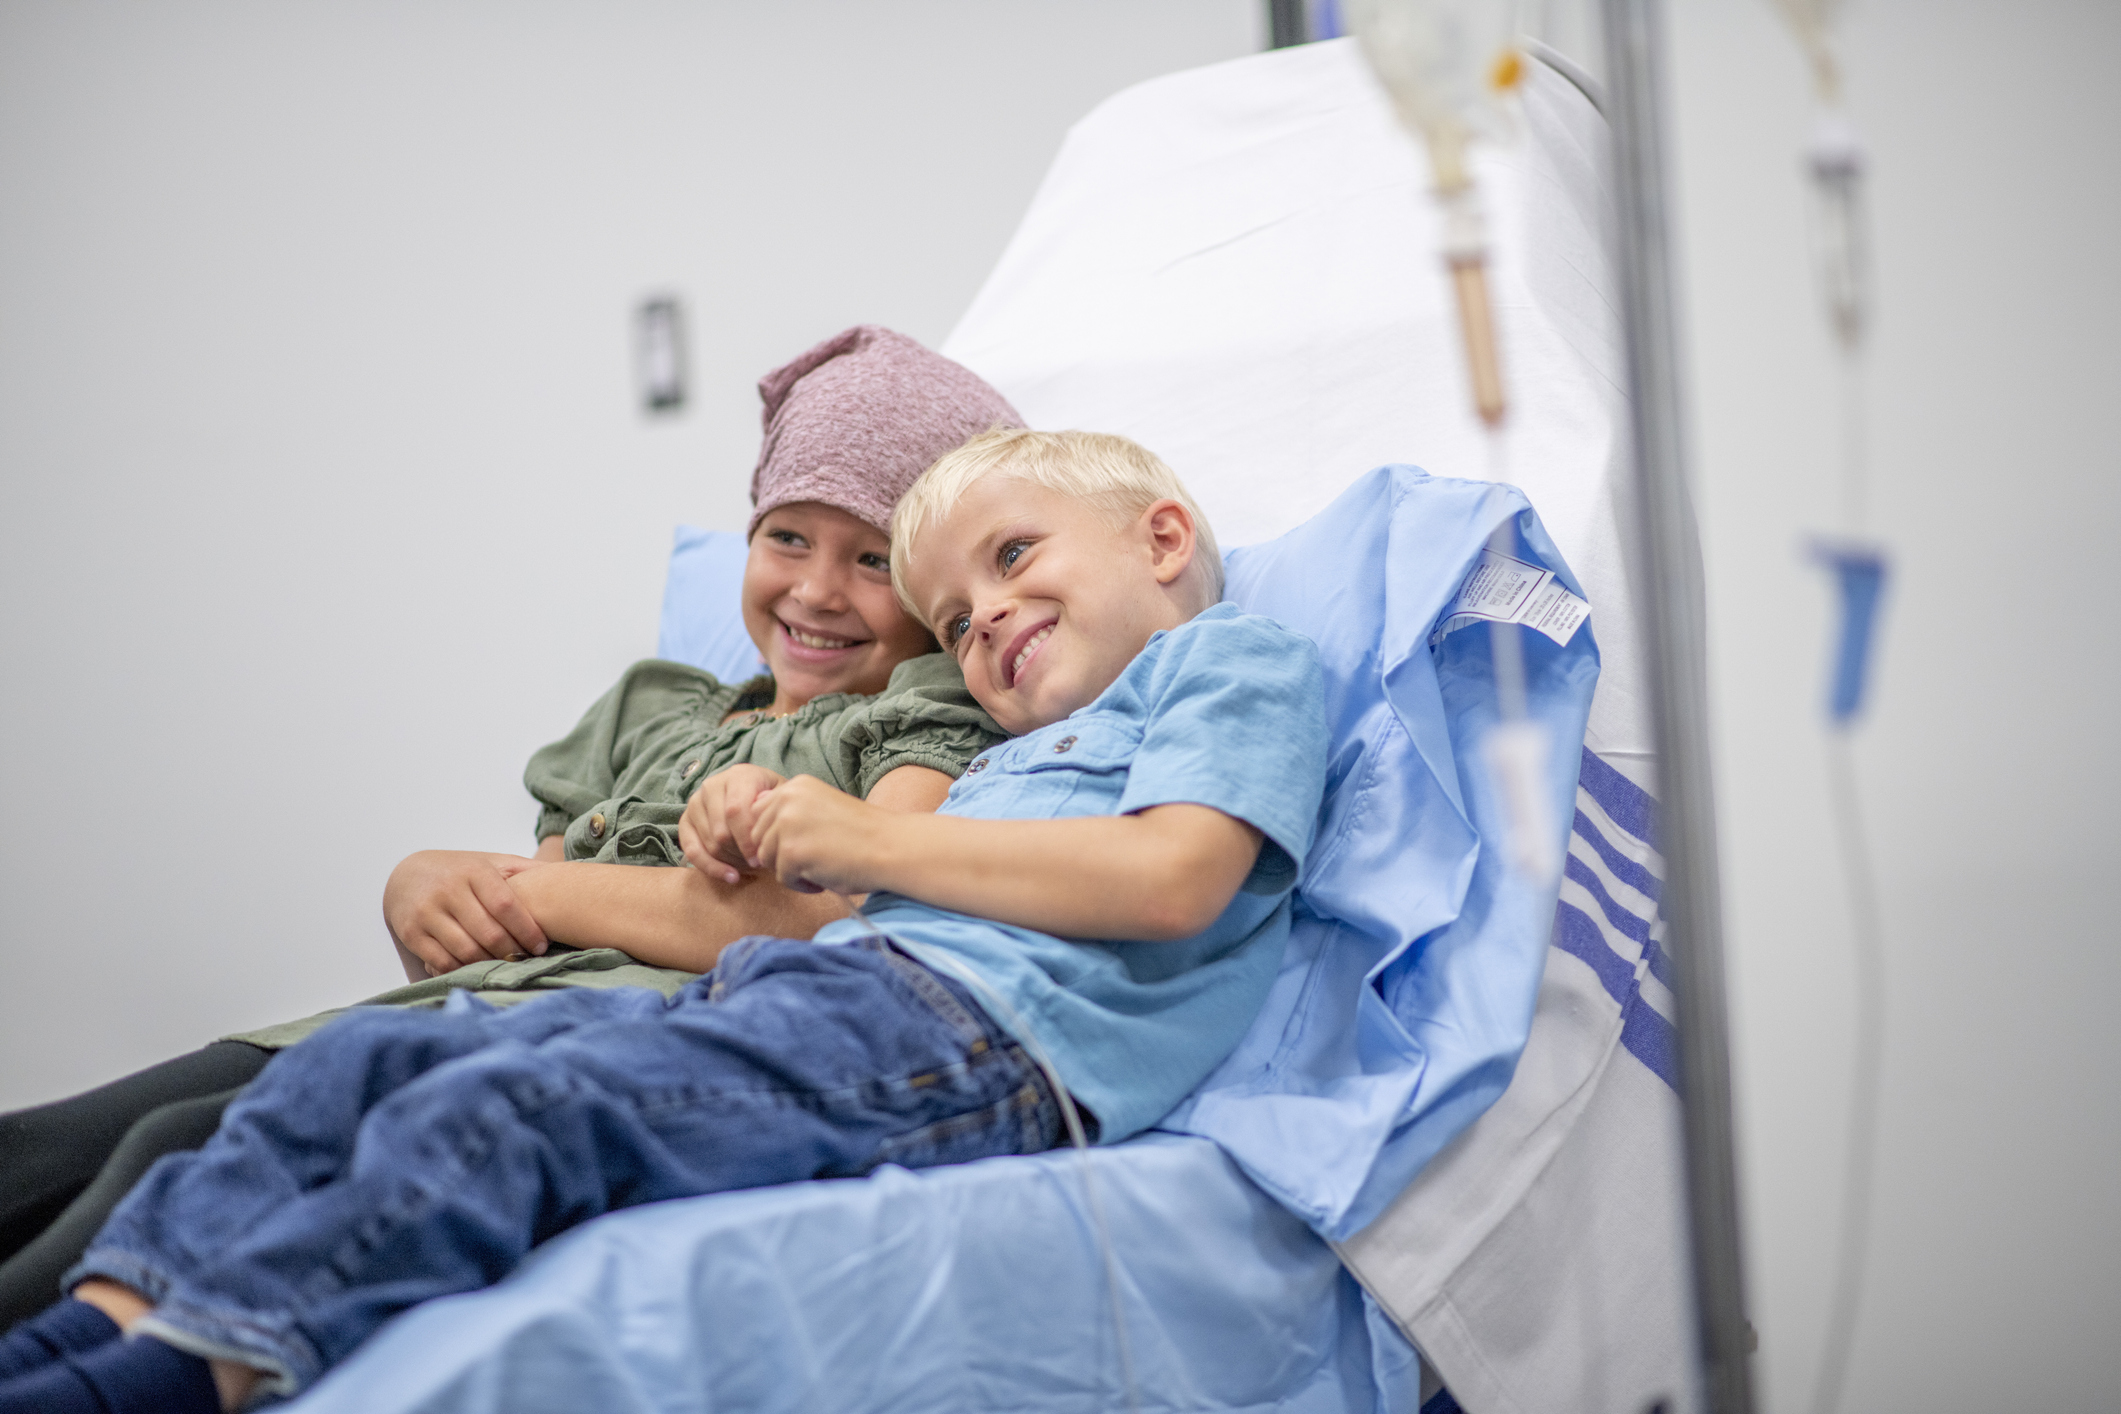 Young girl with bandana on head sitting with boy on hospital bed